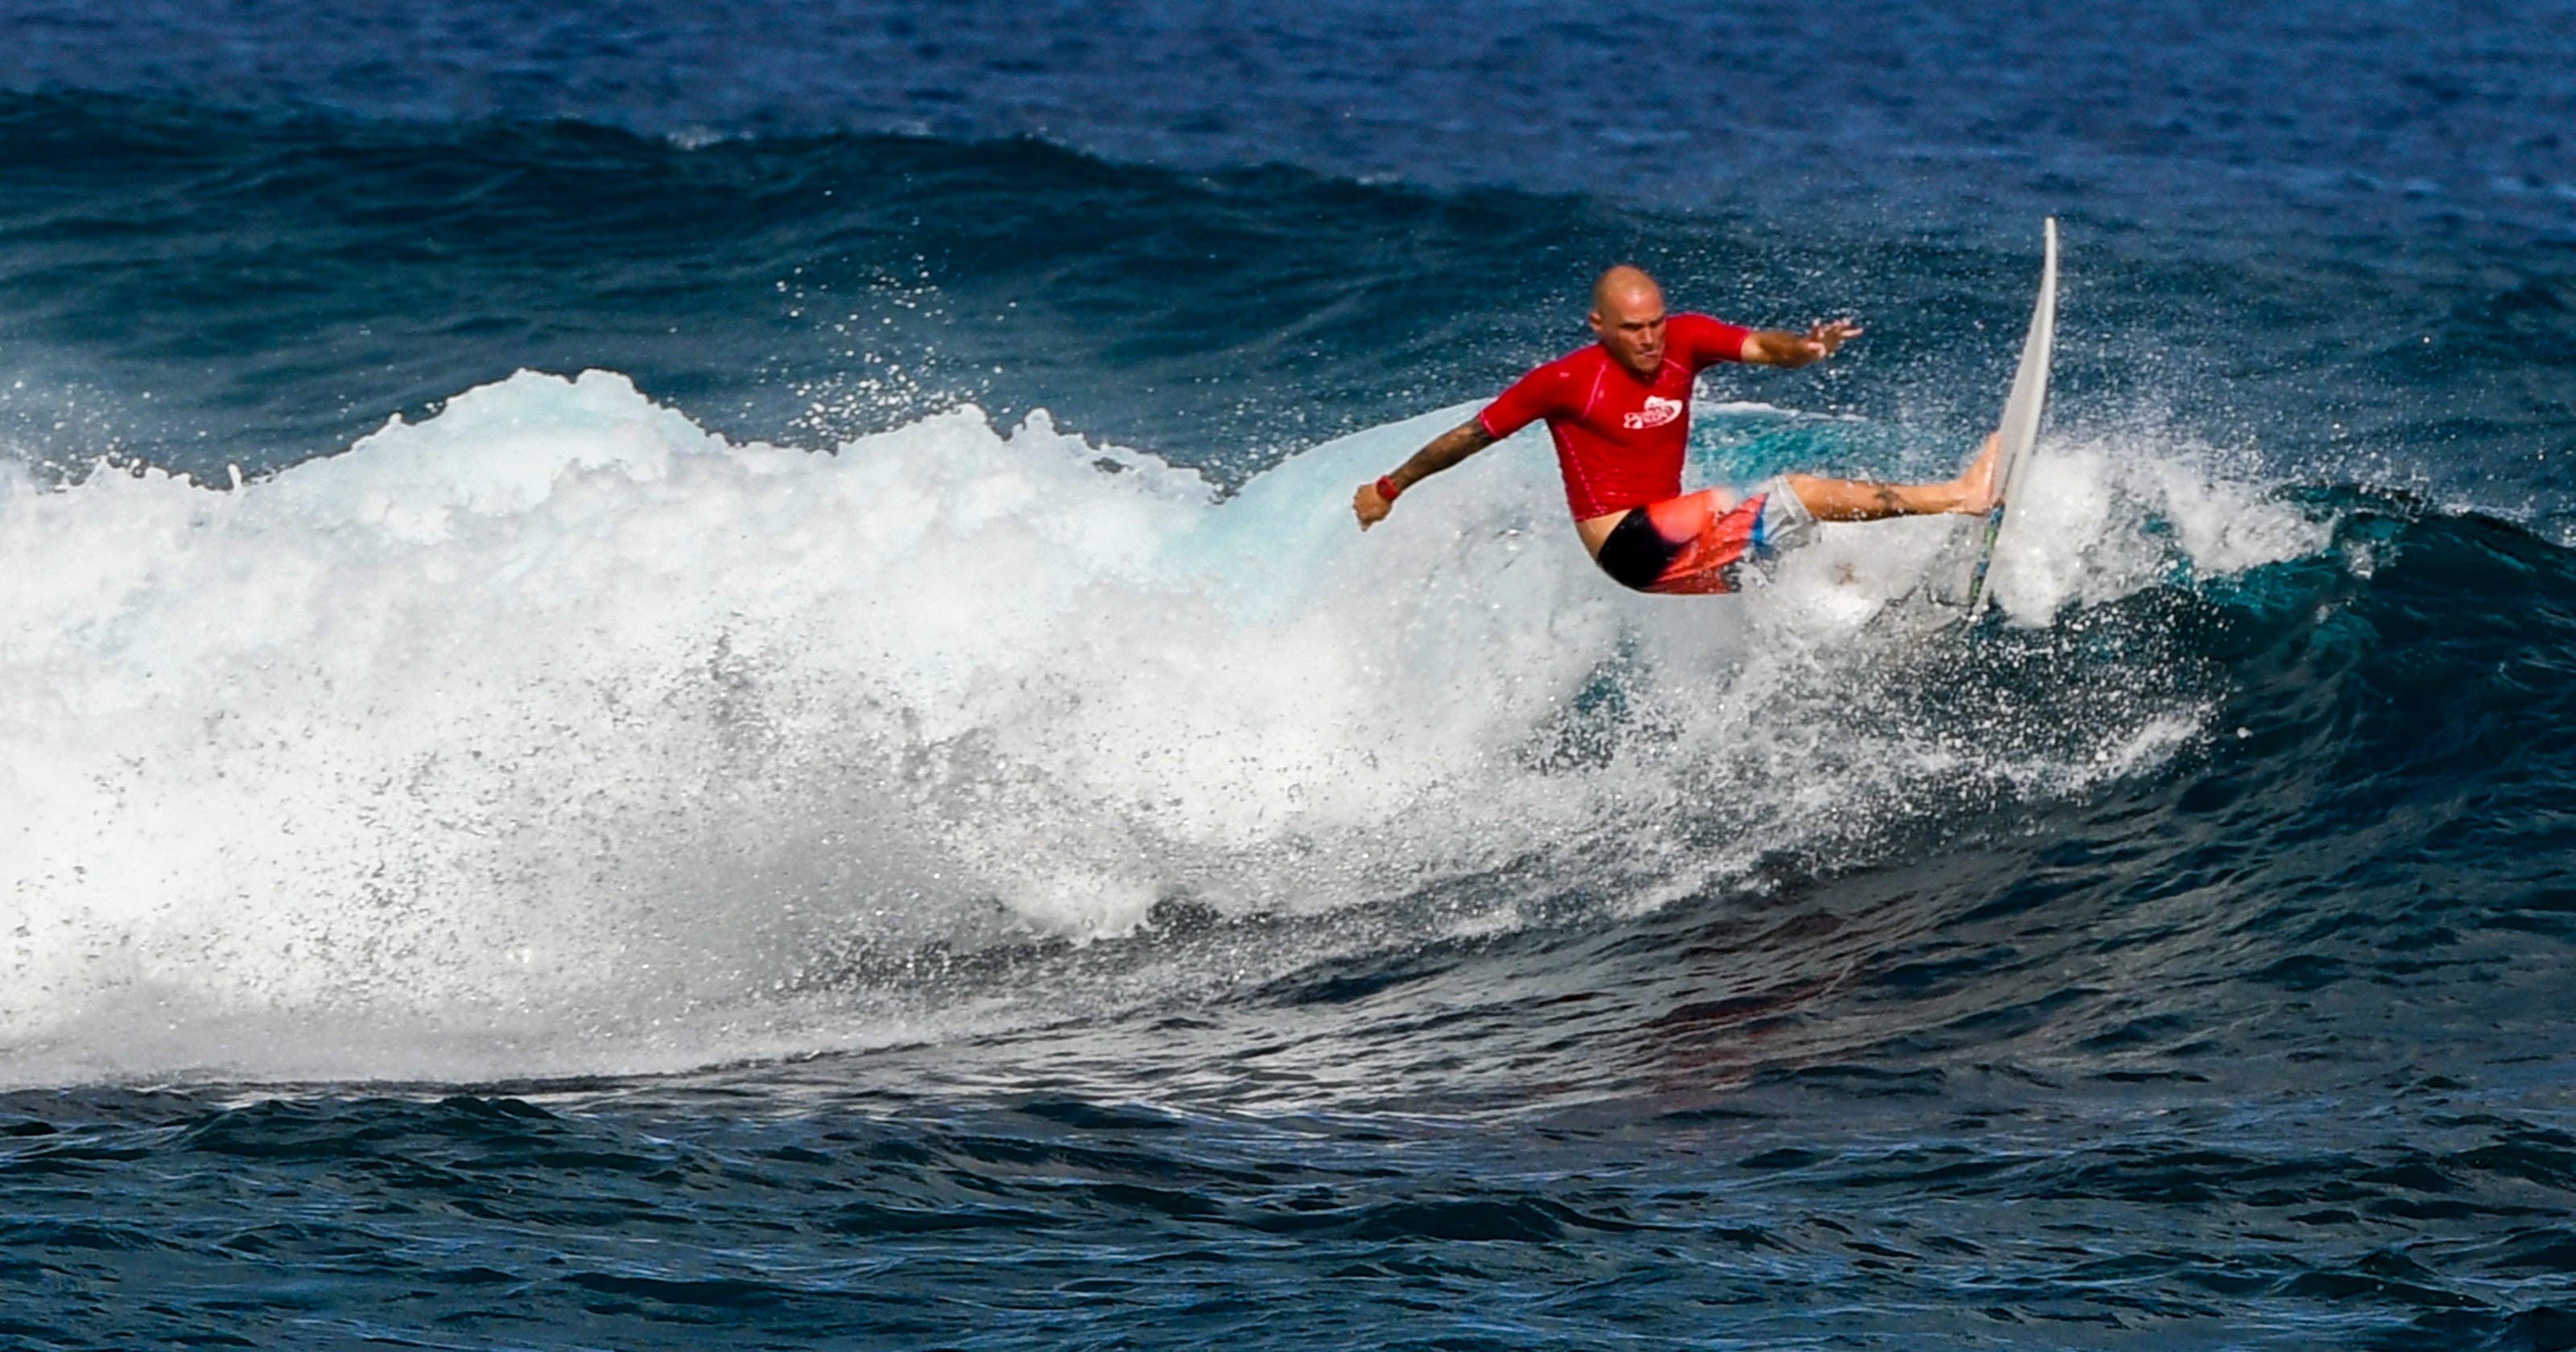 Guam surfers to face world's best at Olympic qualifier next month